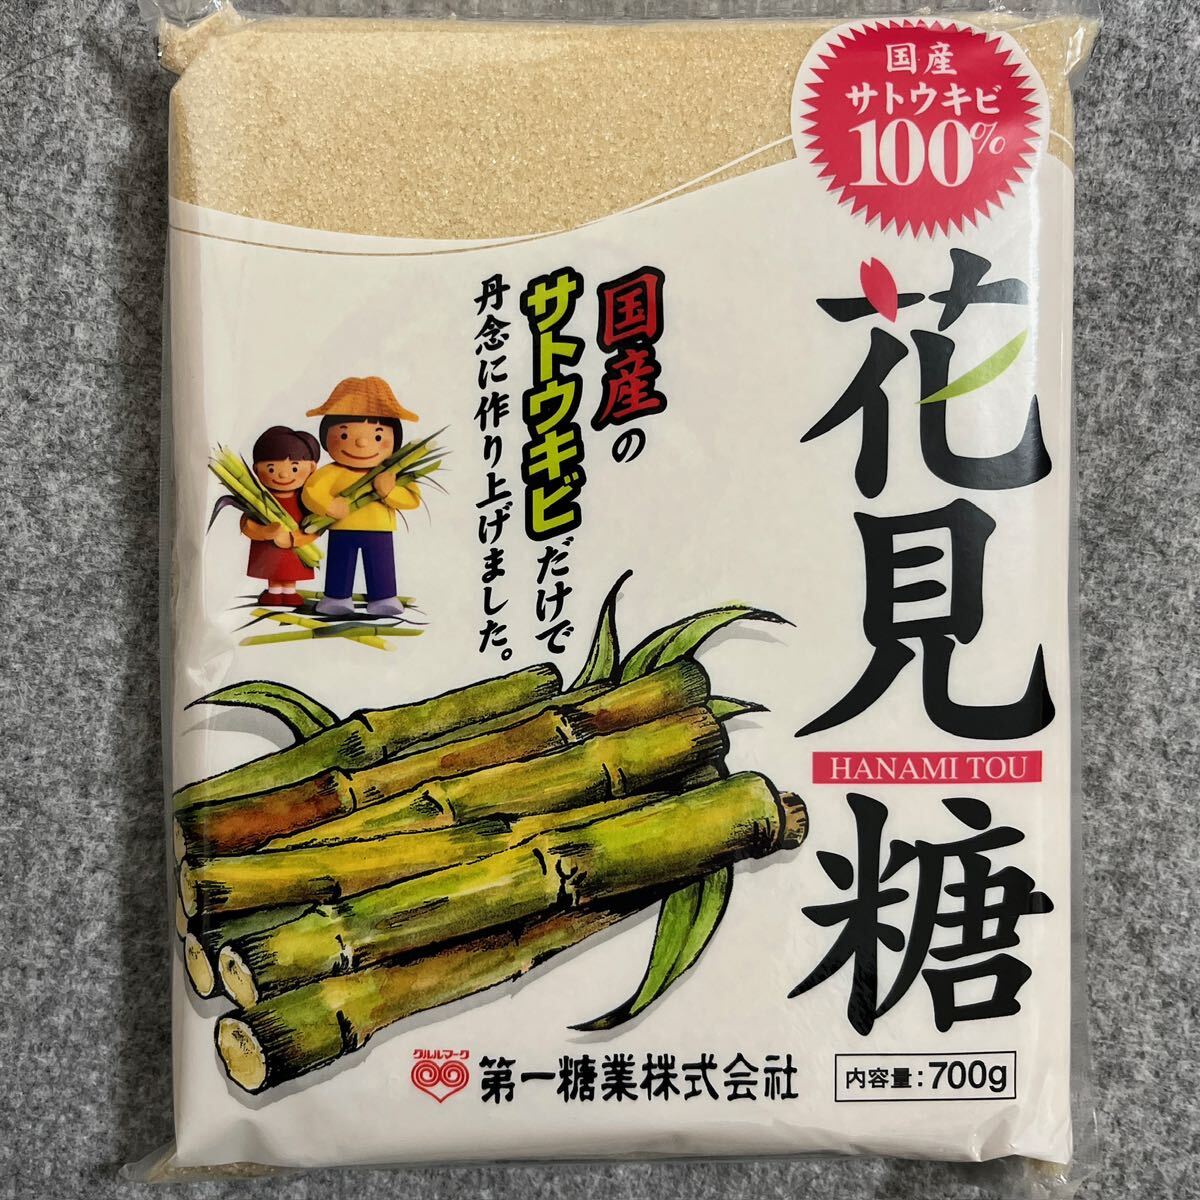  flower see sugar 700g×2 sack set domestic production sato float bi100% use the first sugar industry 